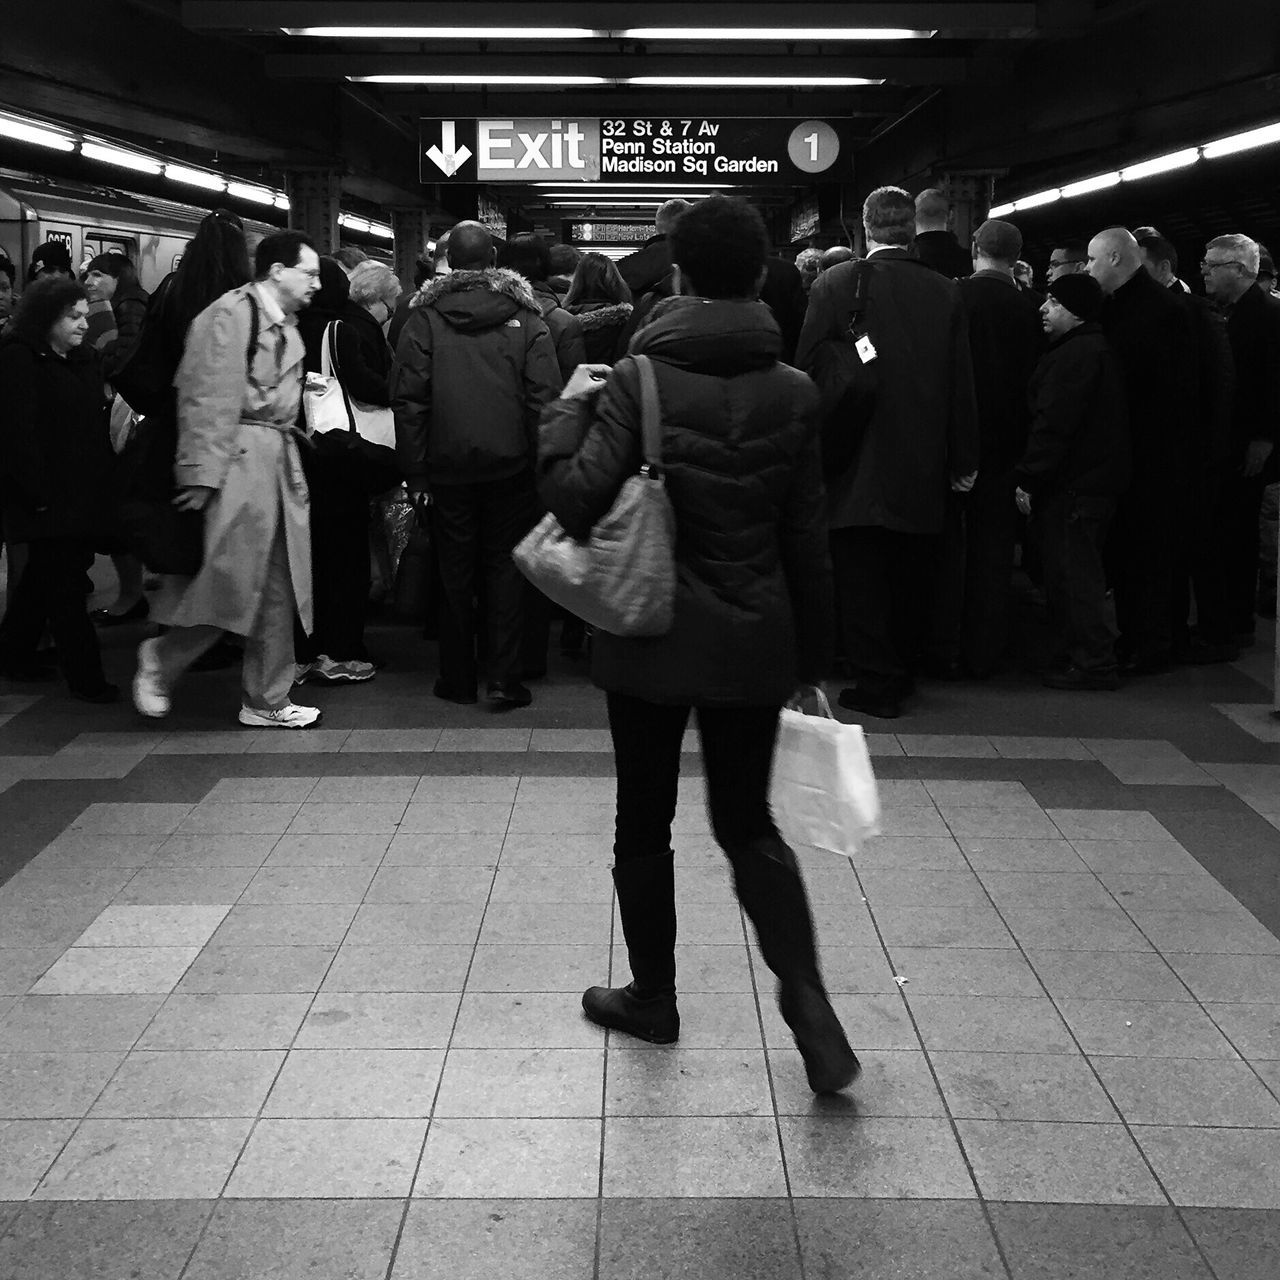 person, men, lifestyles, walking, large group of people, indoors, text, city life, railroad station, leisure activity, full length, rear view, standing, non-western script, public transportation, casual clothing, travel, communication, tiled floor